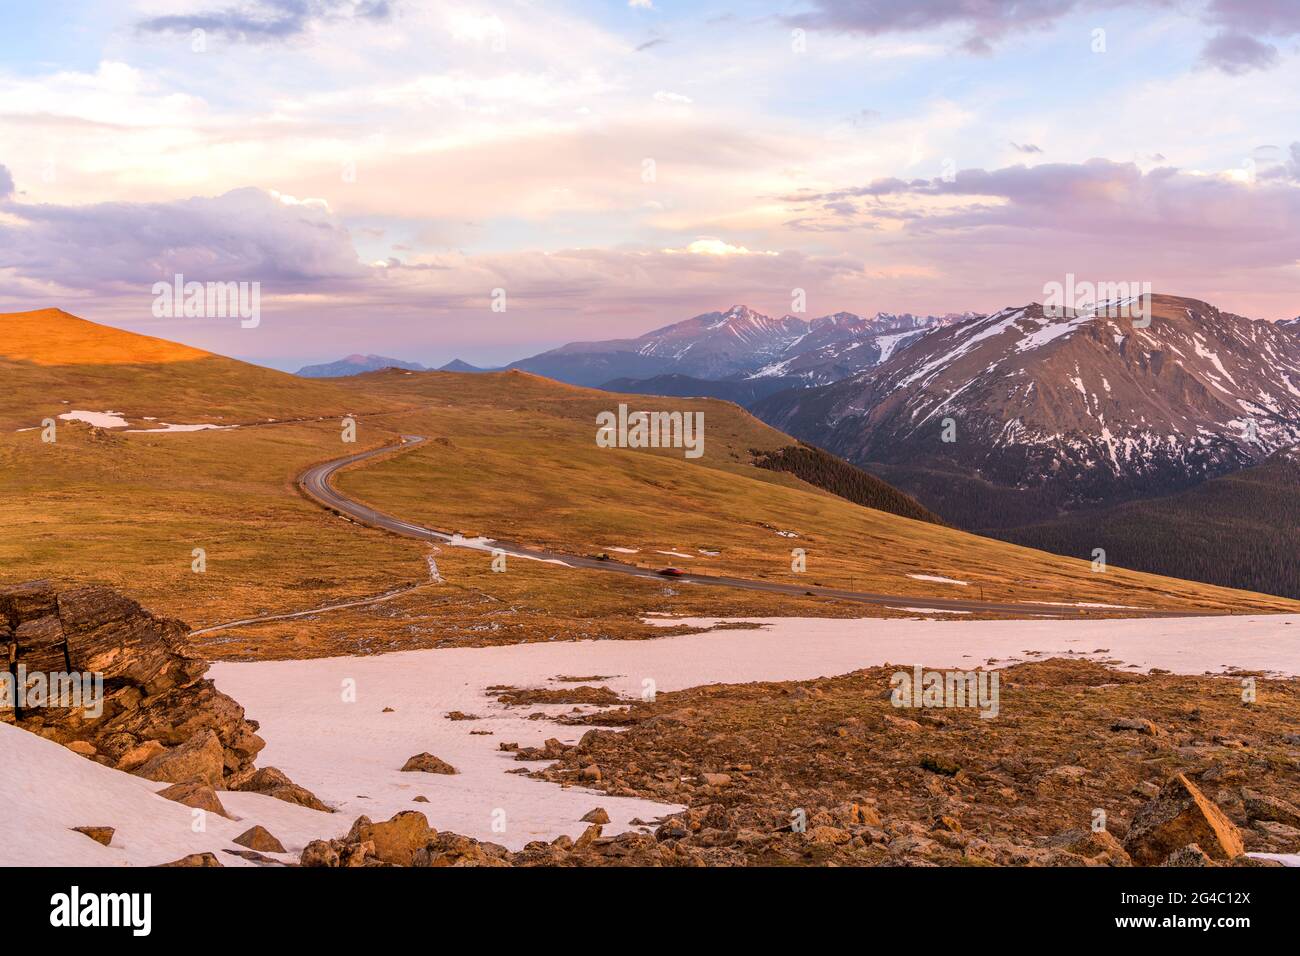 Sunset Trail Ridge Road - A Spring sunset at Trail Ridge Road, with Longs Peak (14,255 feet) rising high in the background, RMNP, Colorado, USA. Stock Photo